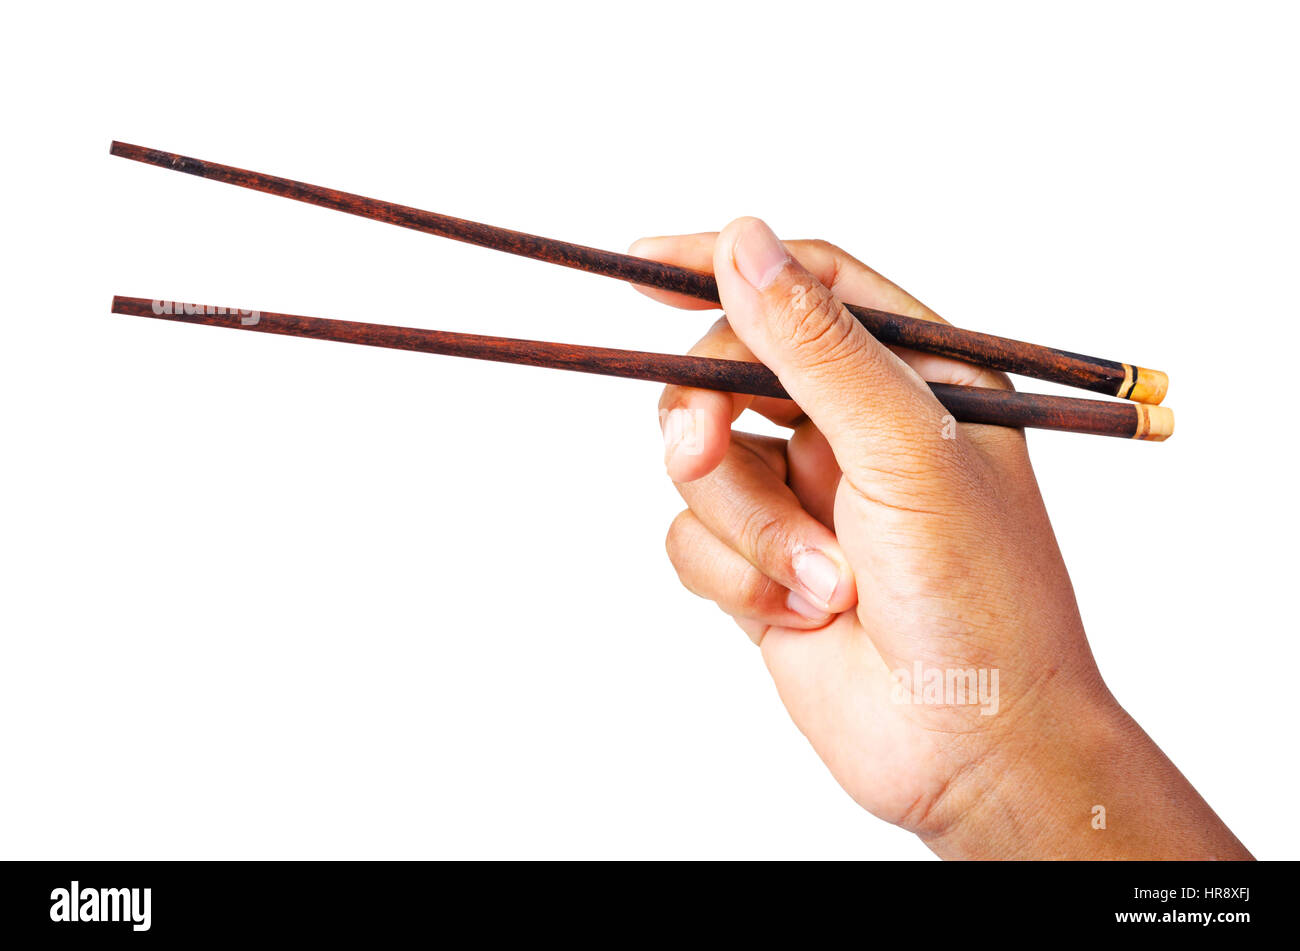 Person 's right hand using bamboo chopsticks isolated on white background, Saved clipping path. Stock Photo